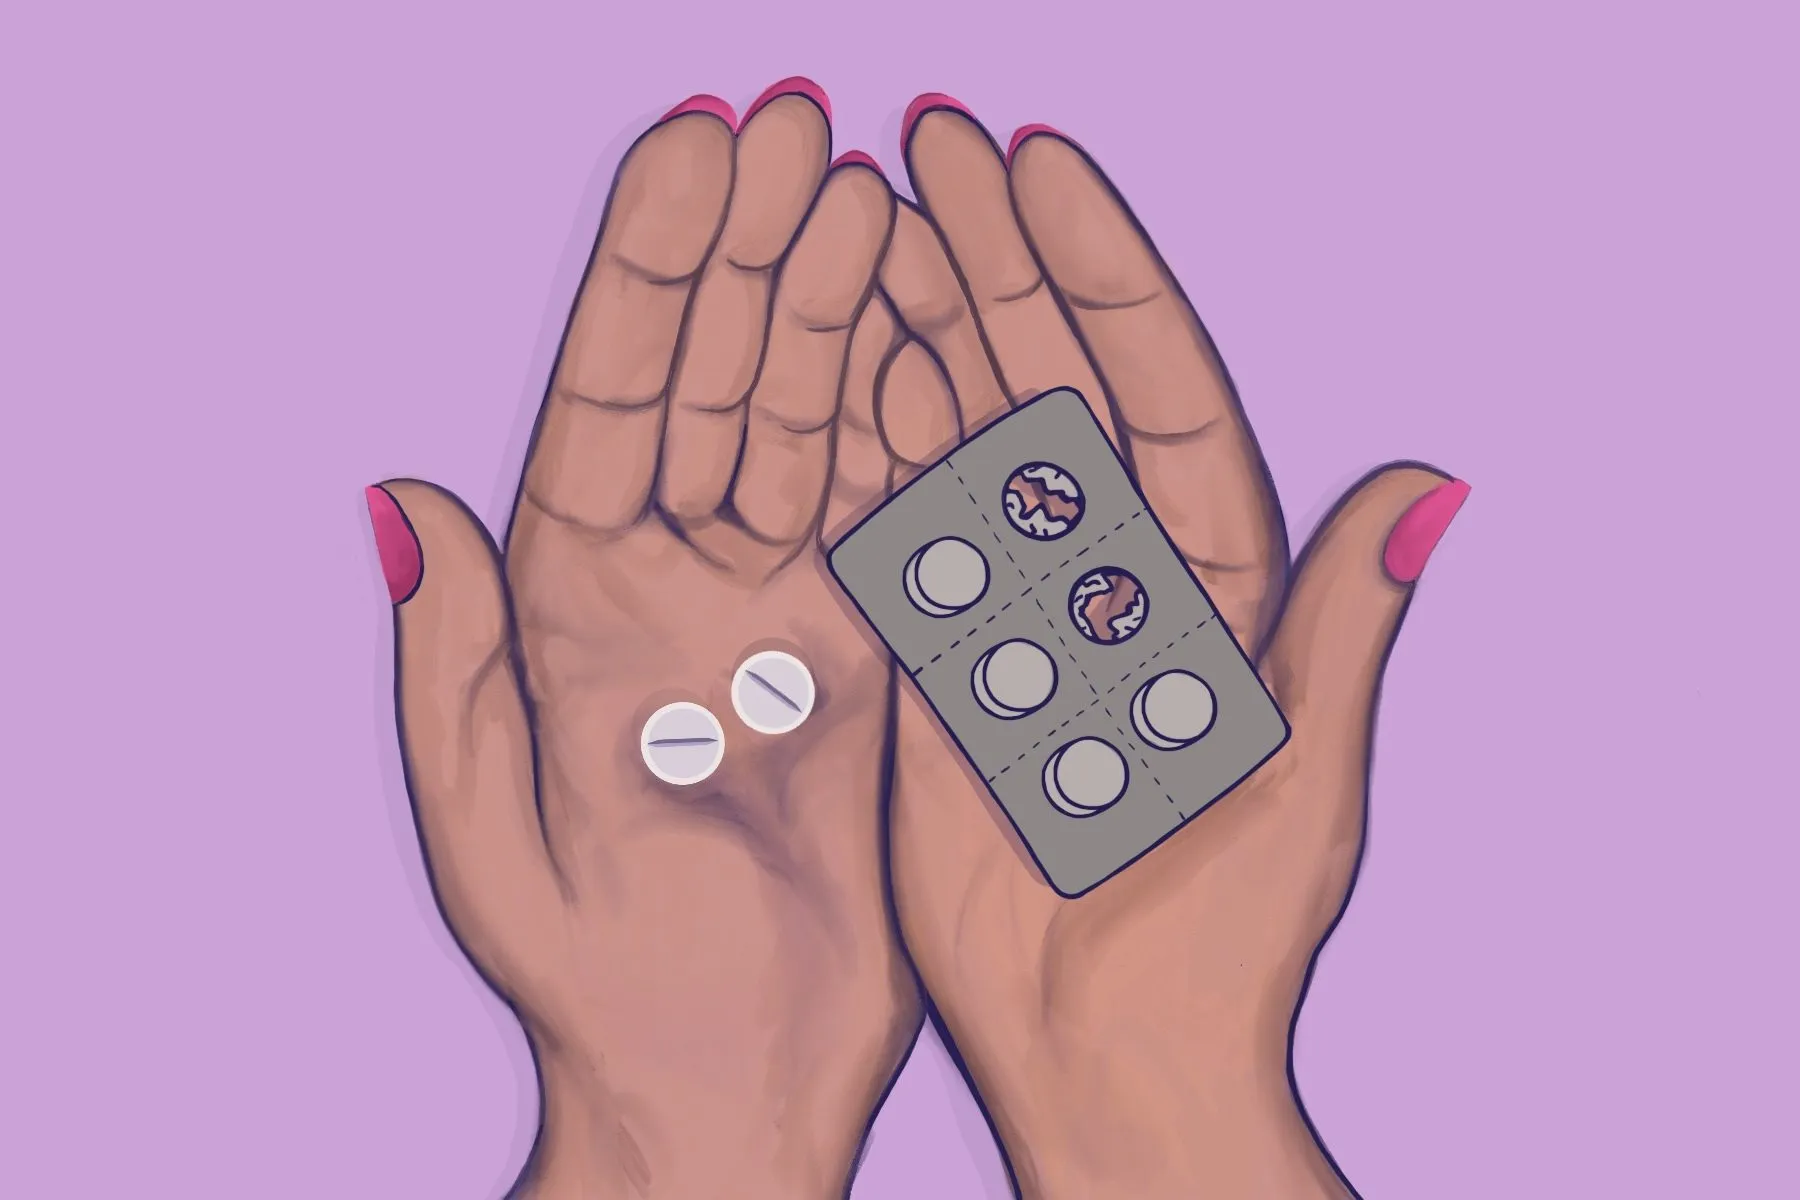 Abortion Pills in a Person's Hands